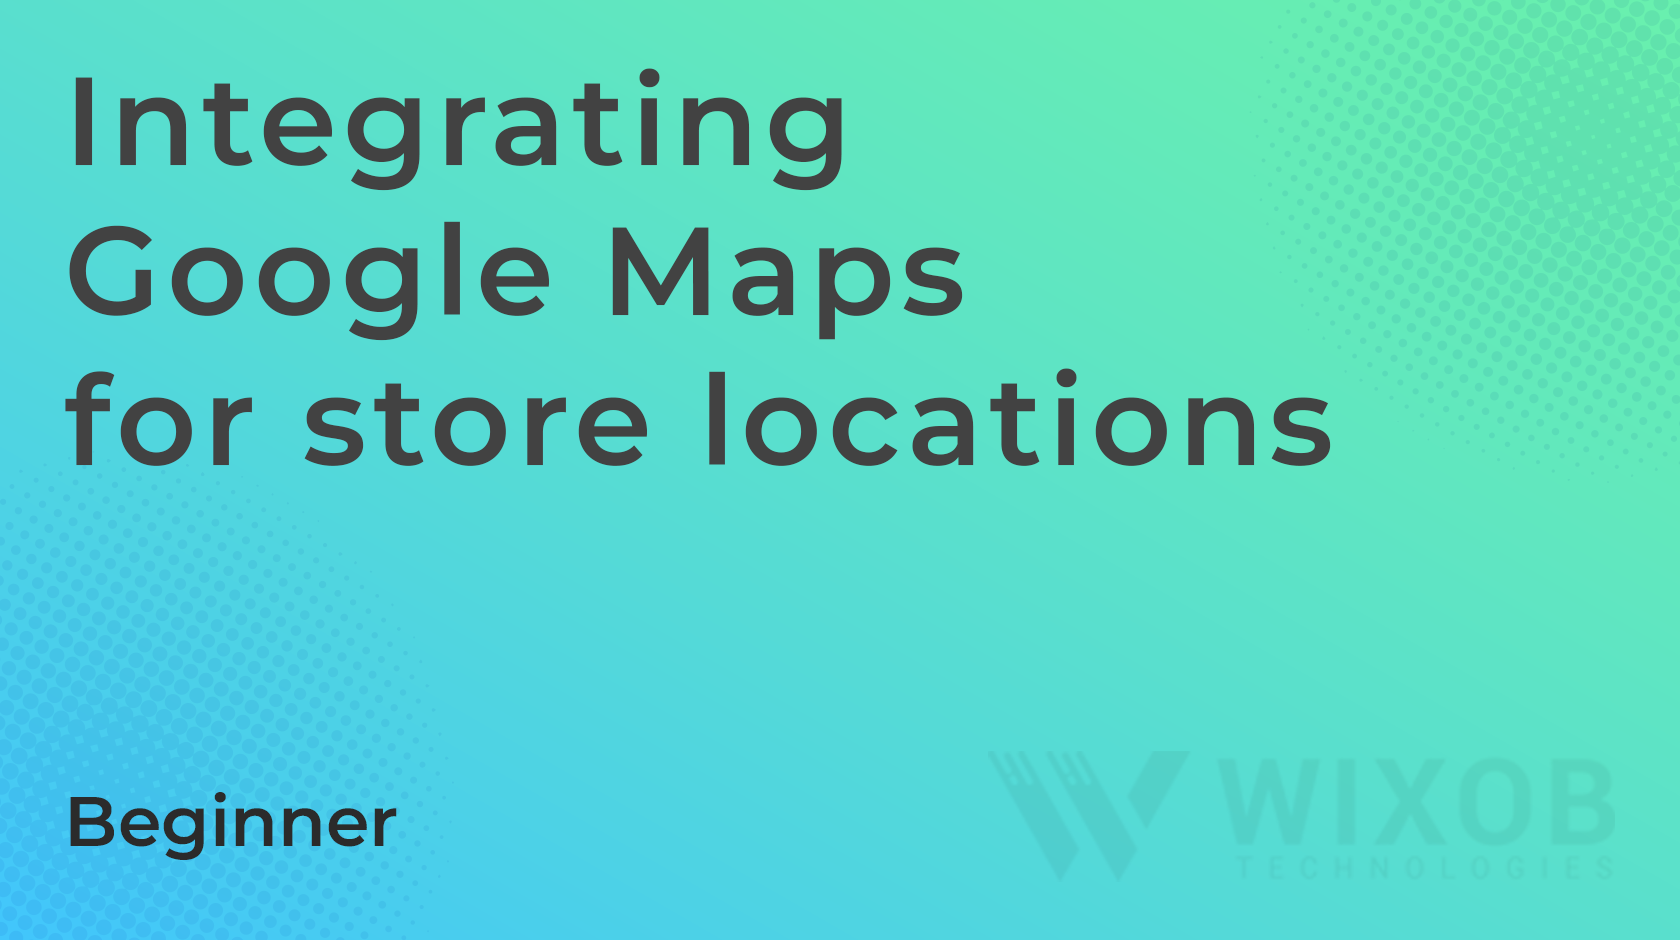 Integrating Google Maps for store locations